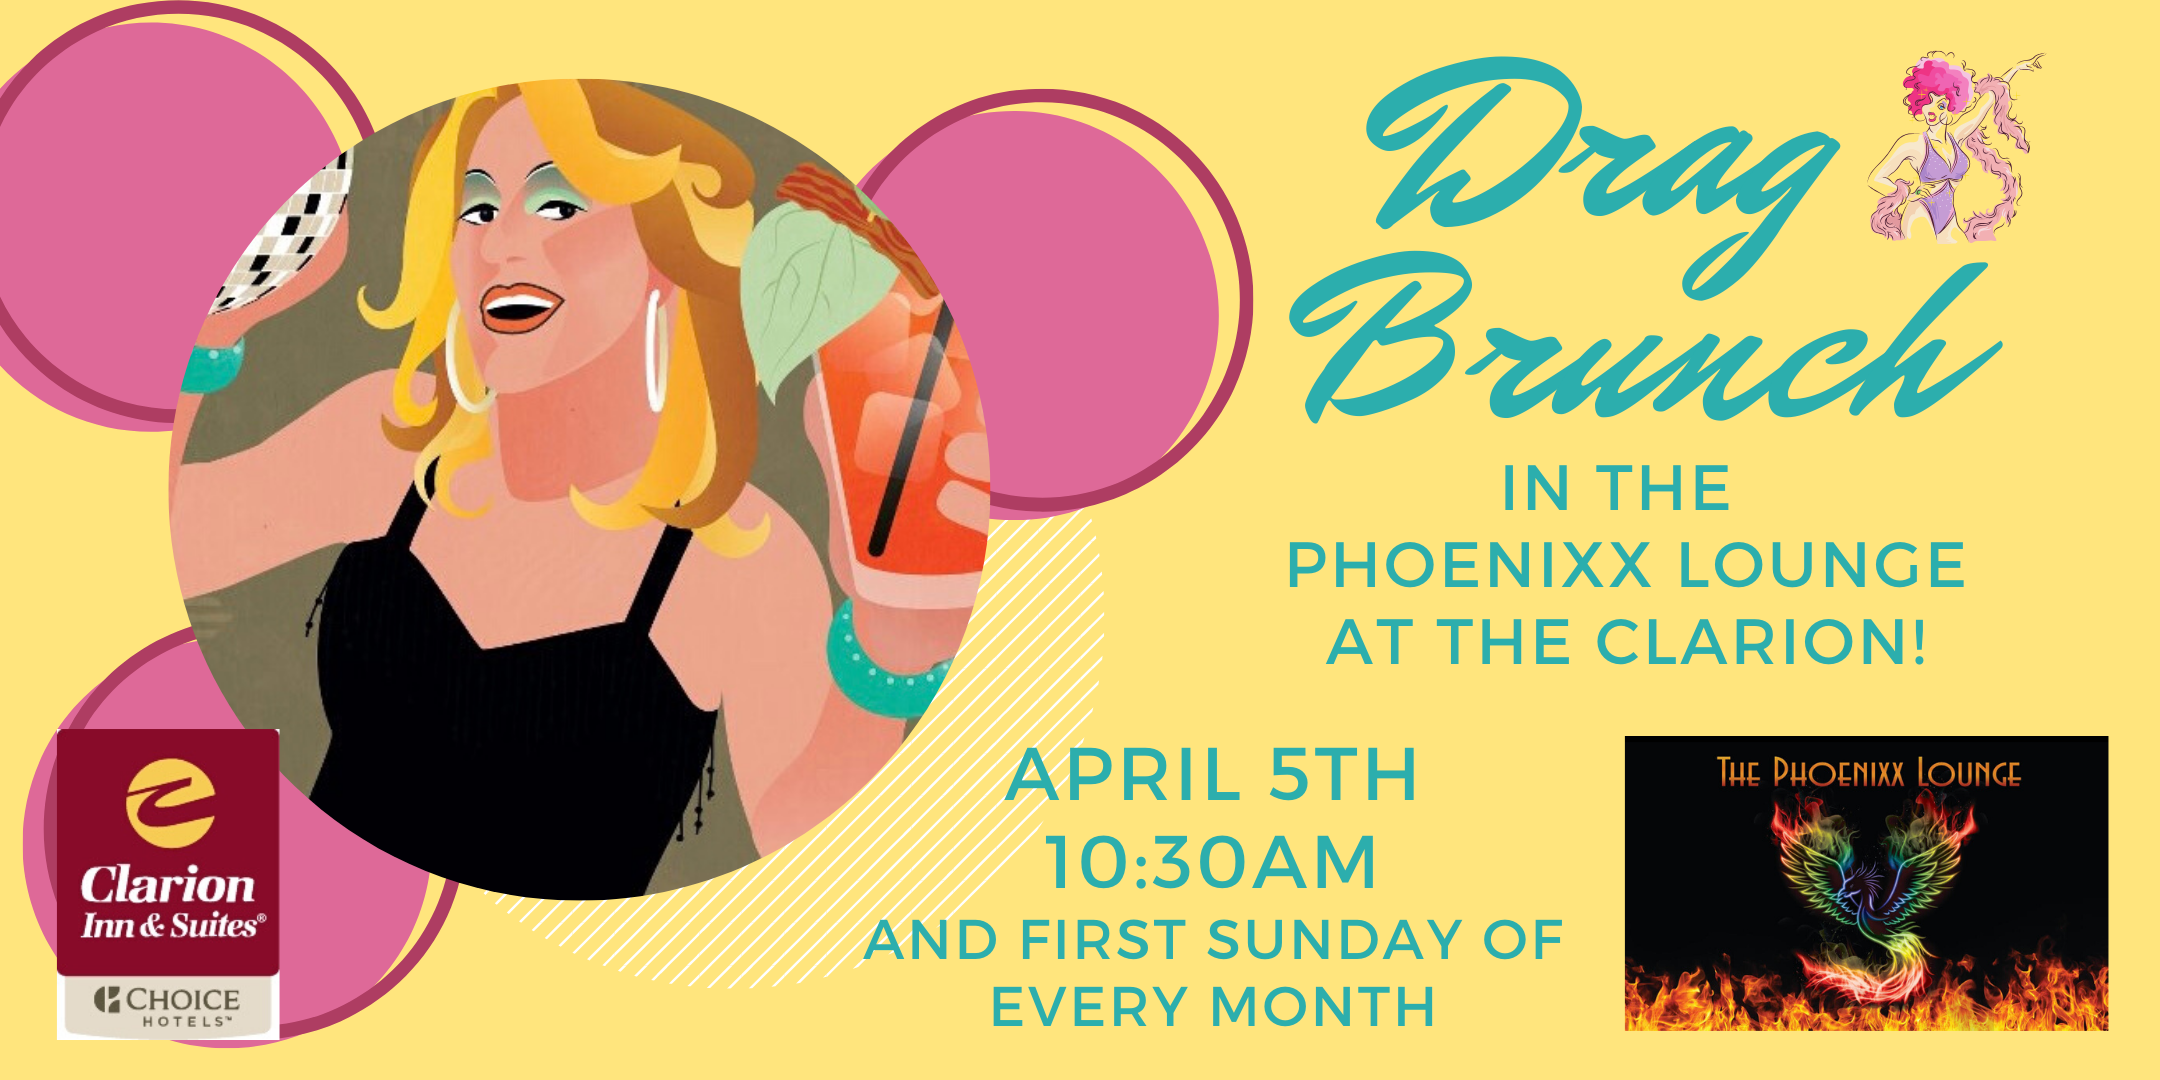 Drag Brunch at the Clarion